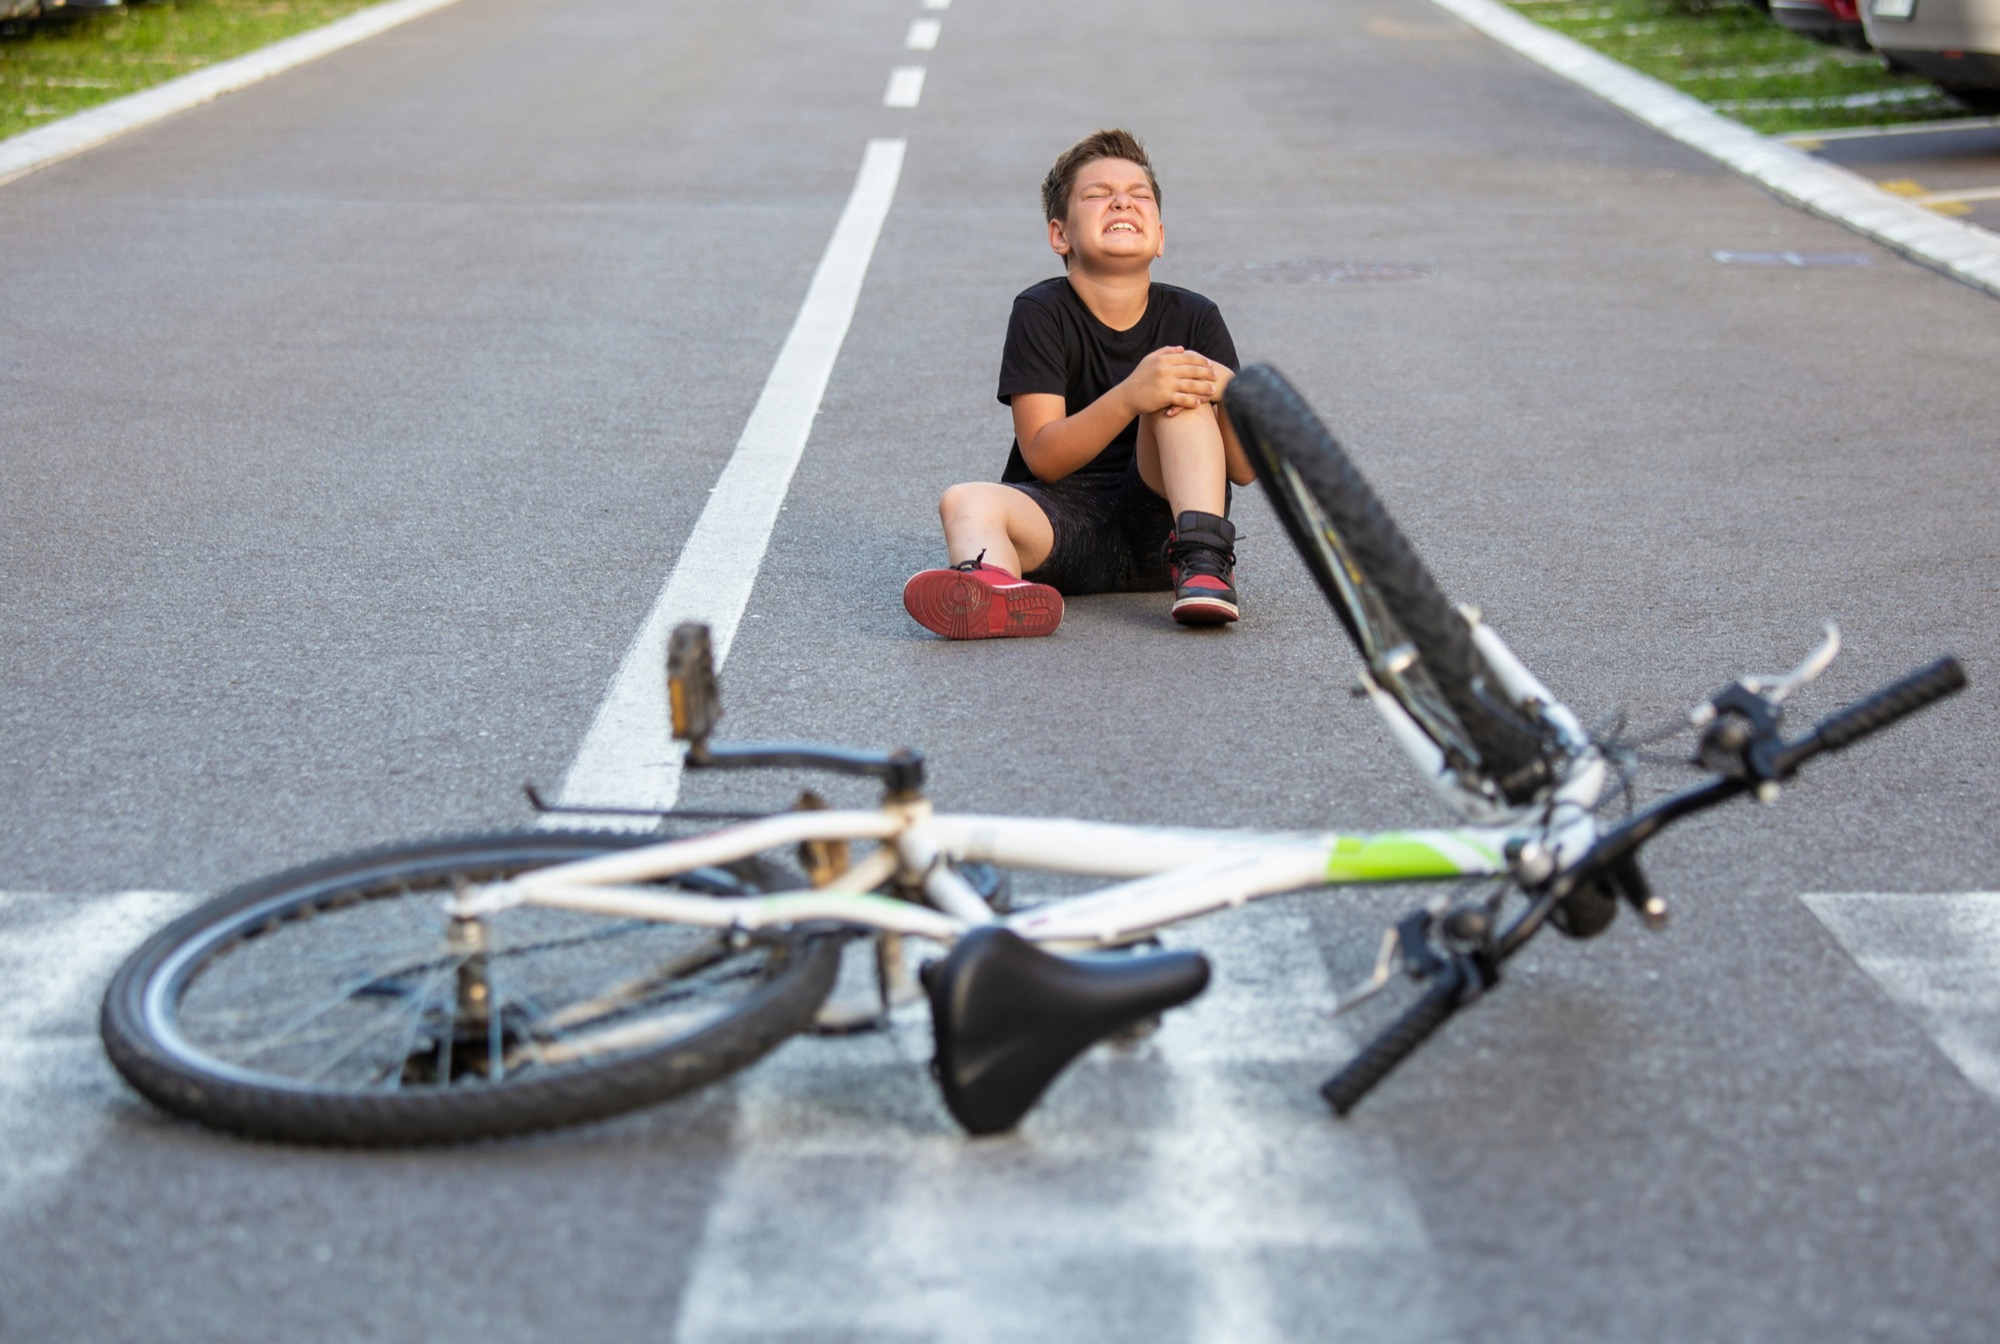 Now imagine it's the bike's fault and you don't bother to fix it - what kind of parent are you?!